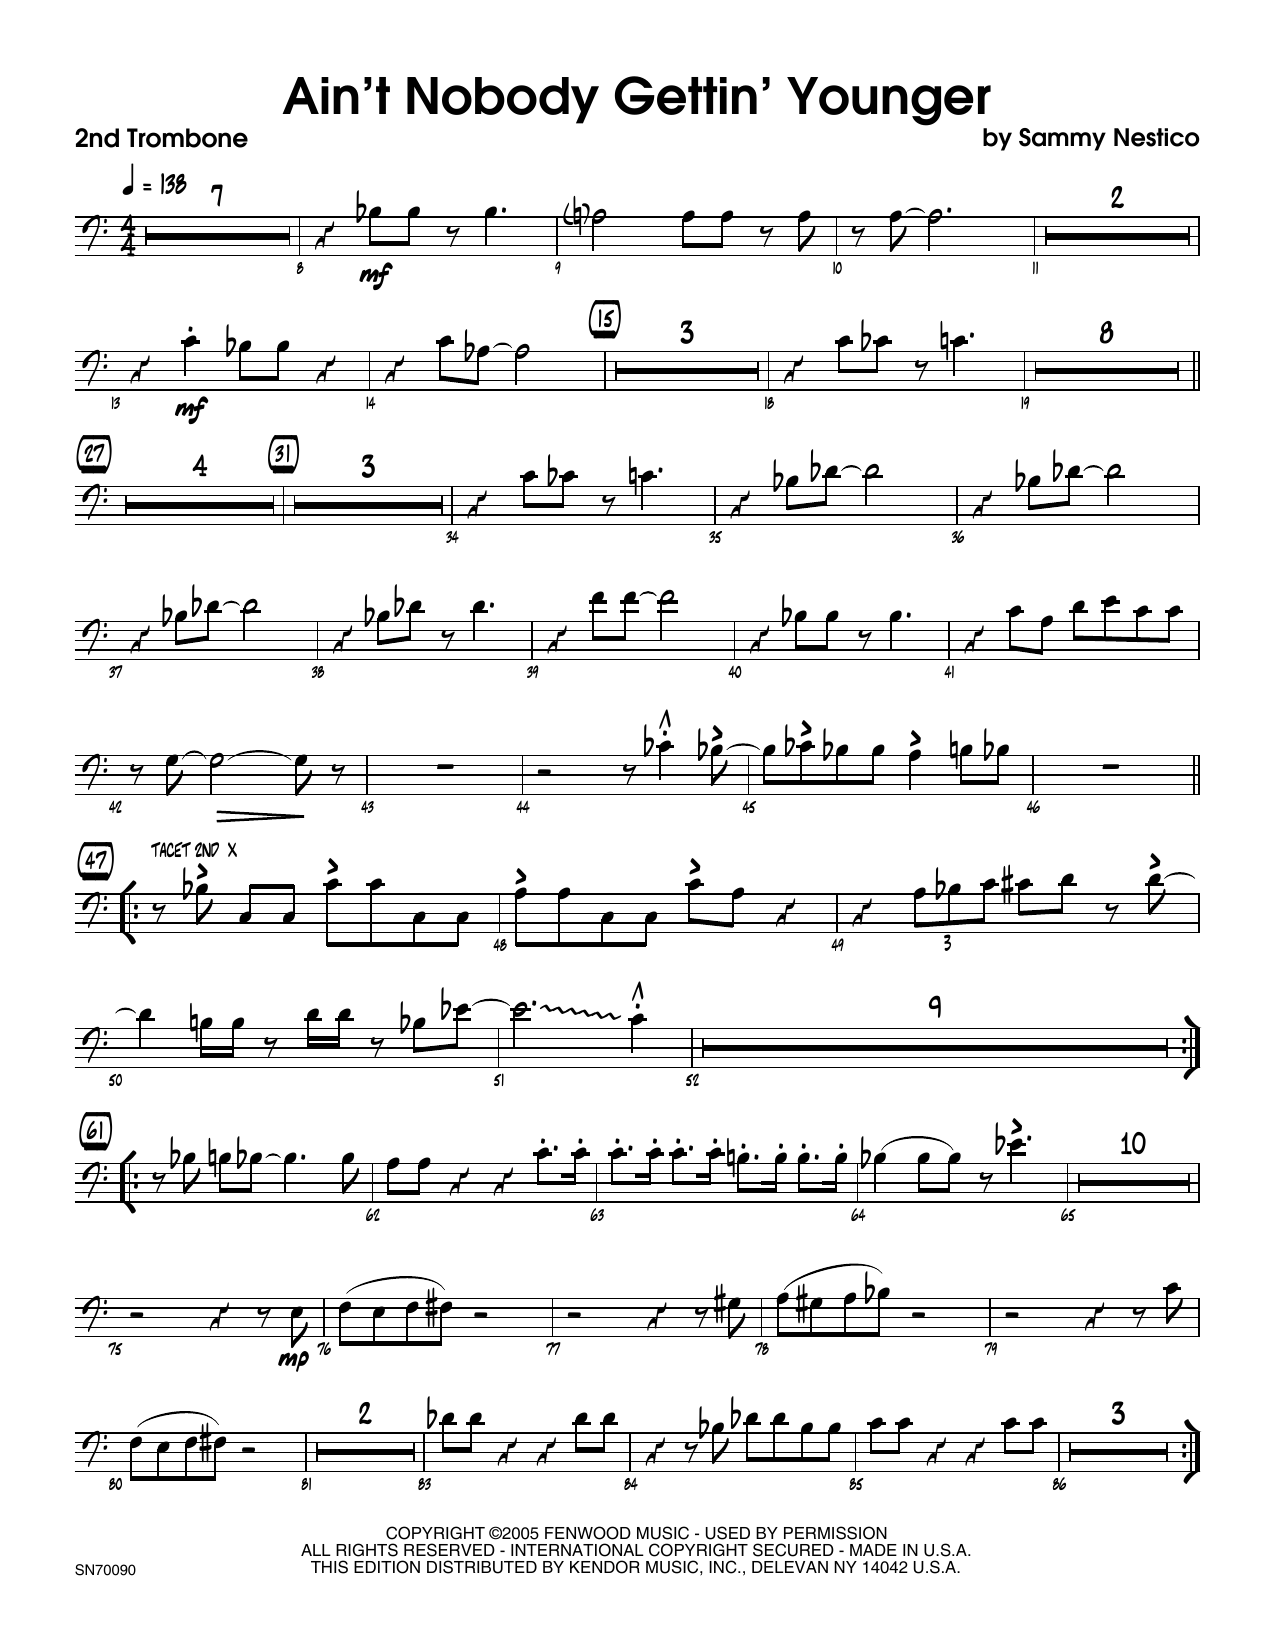 Download Sammy Nestico Ain't Nobody Gettin' Younger - 2nd Trom Sheet Music